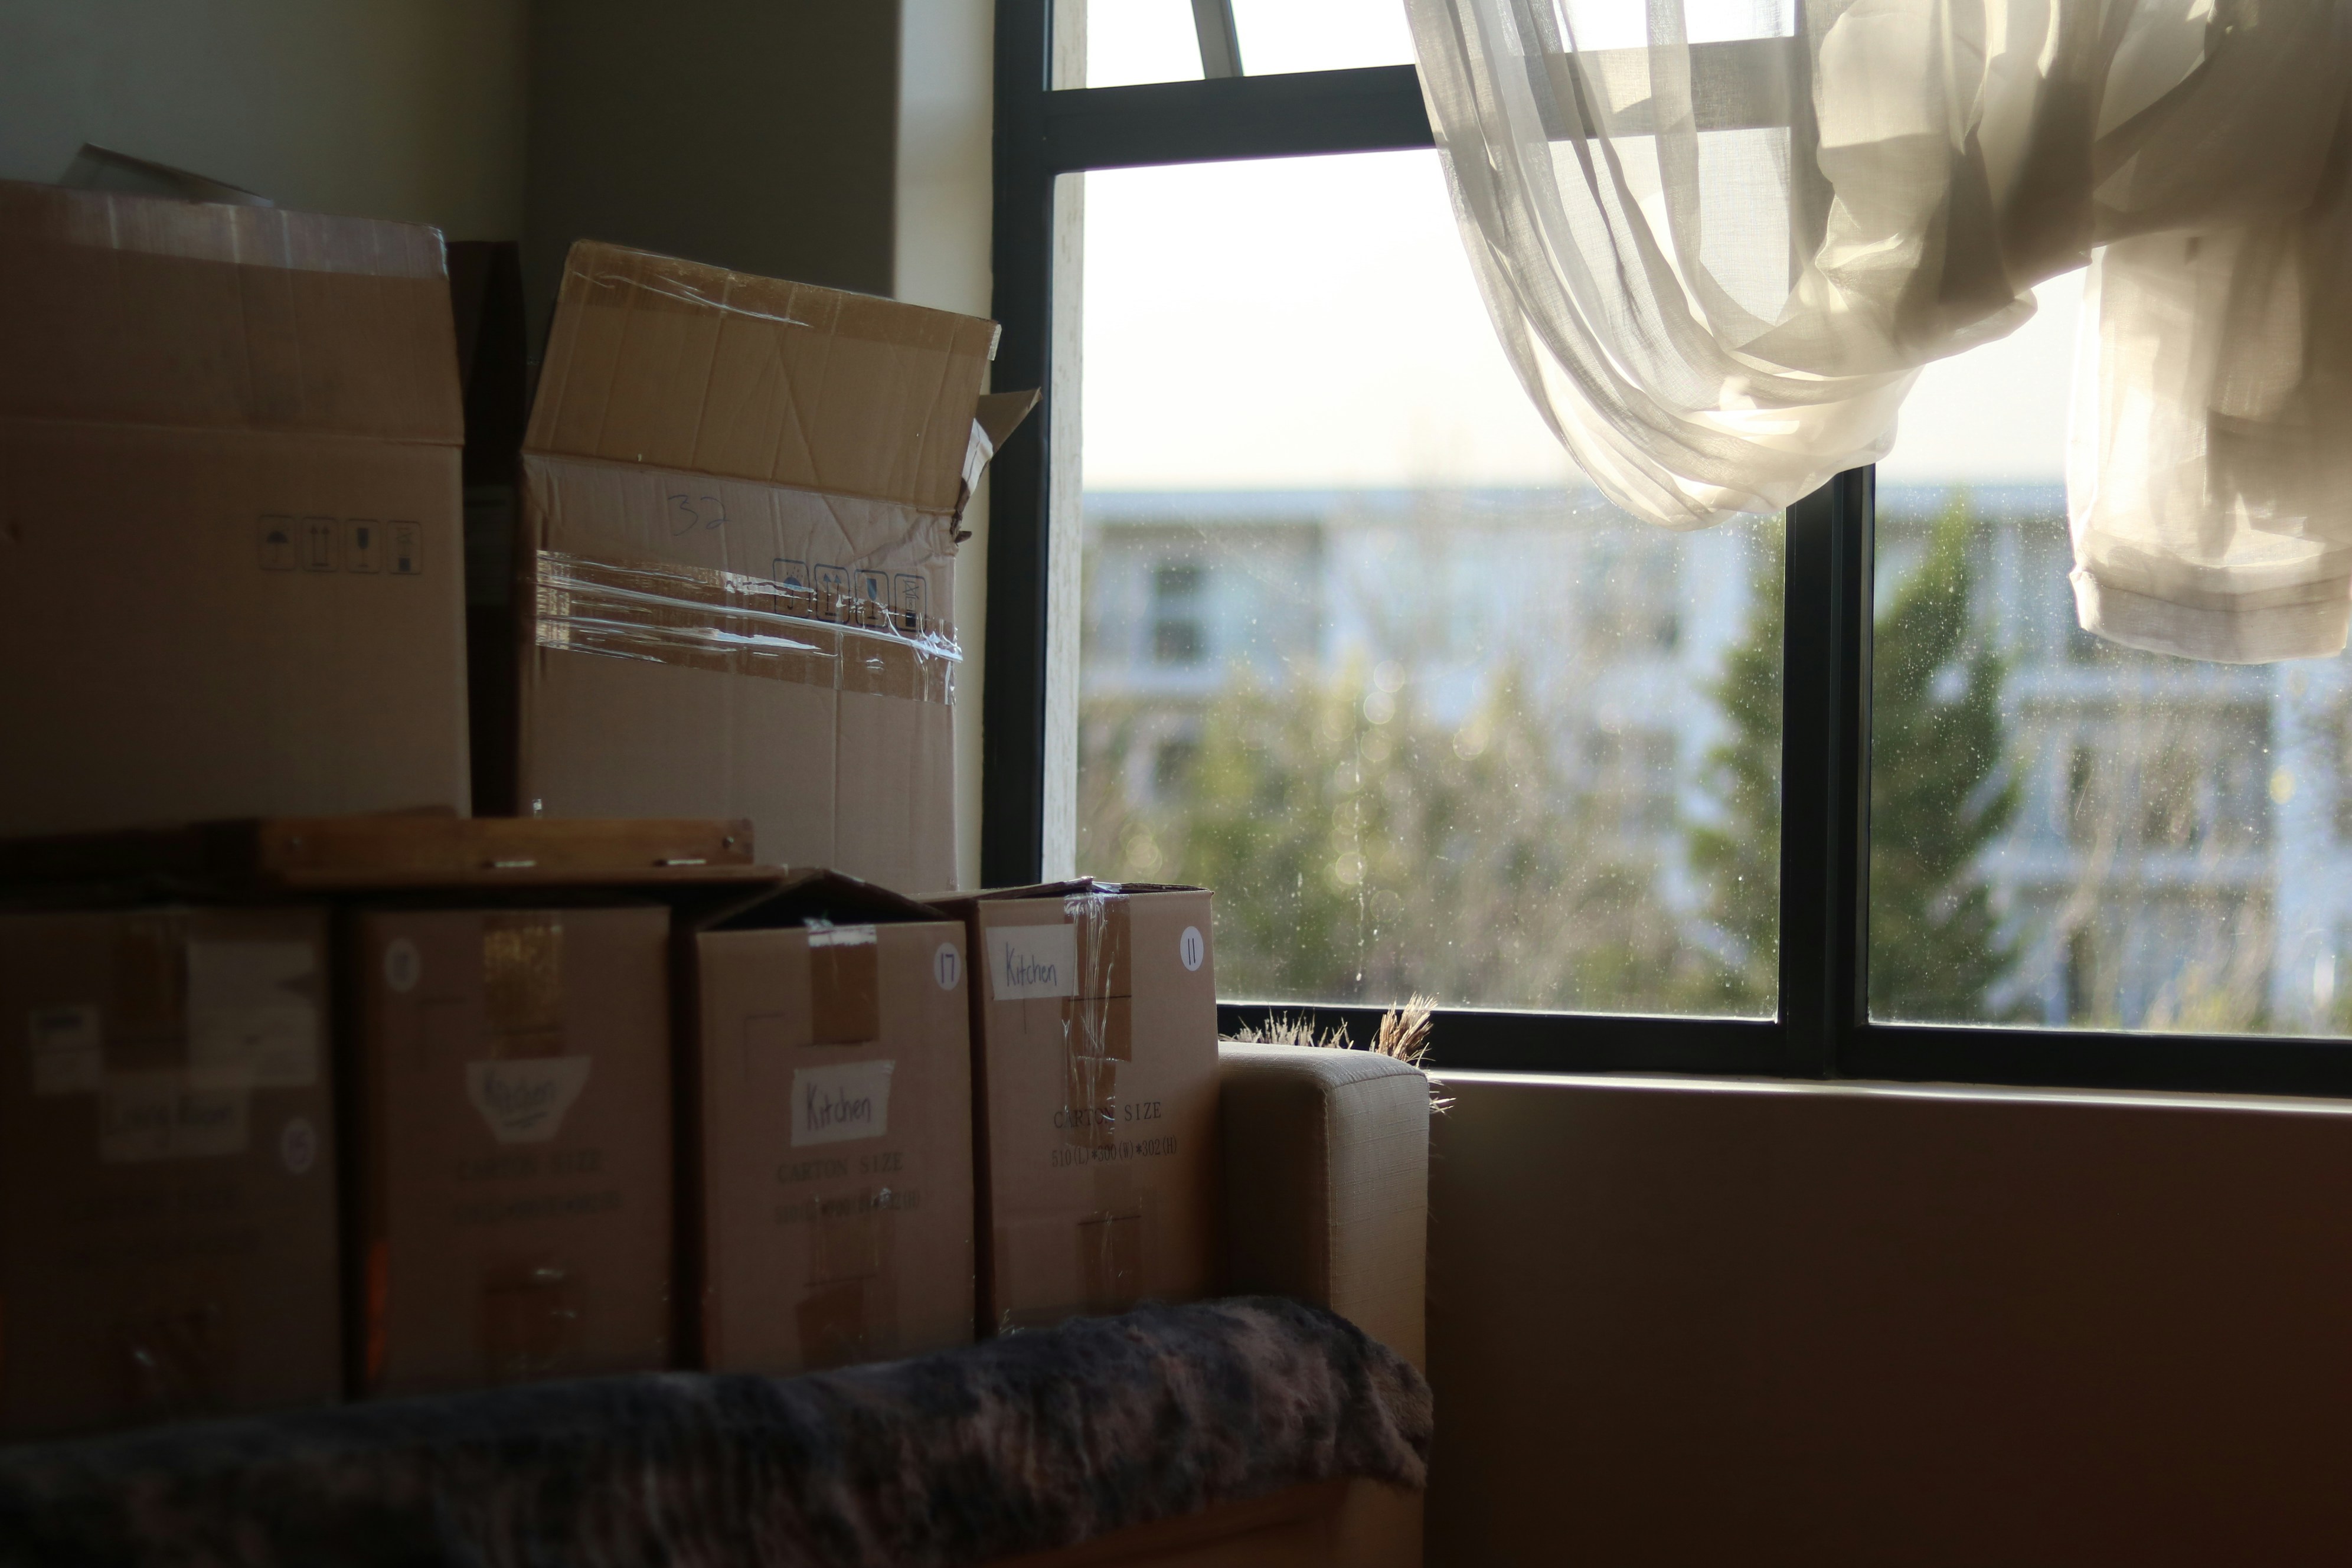 Moving boxes by a window